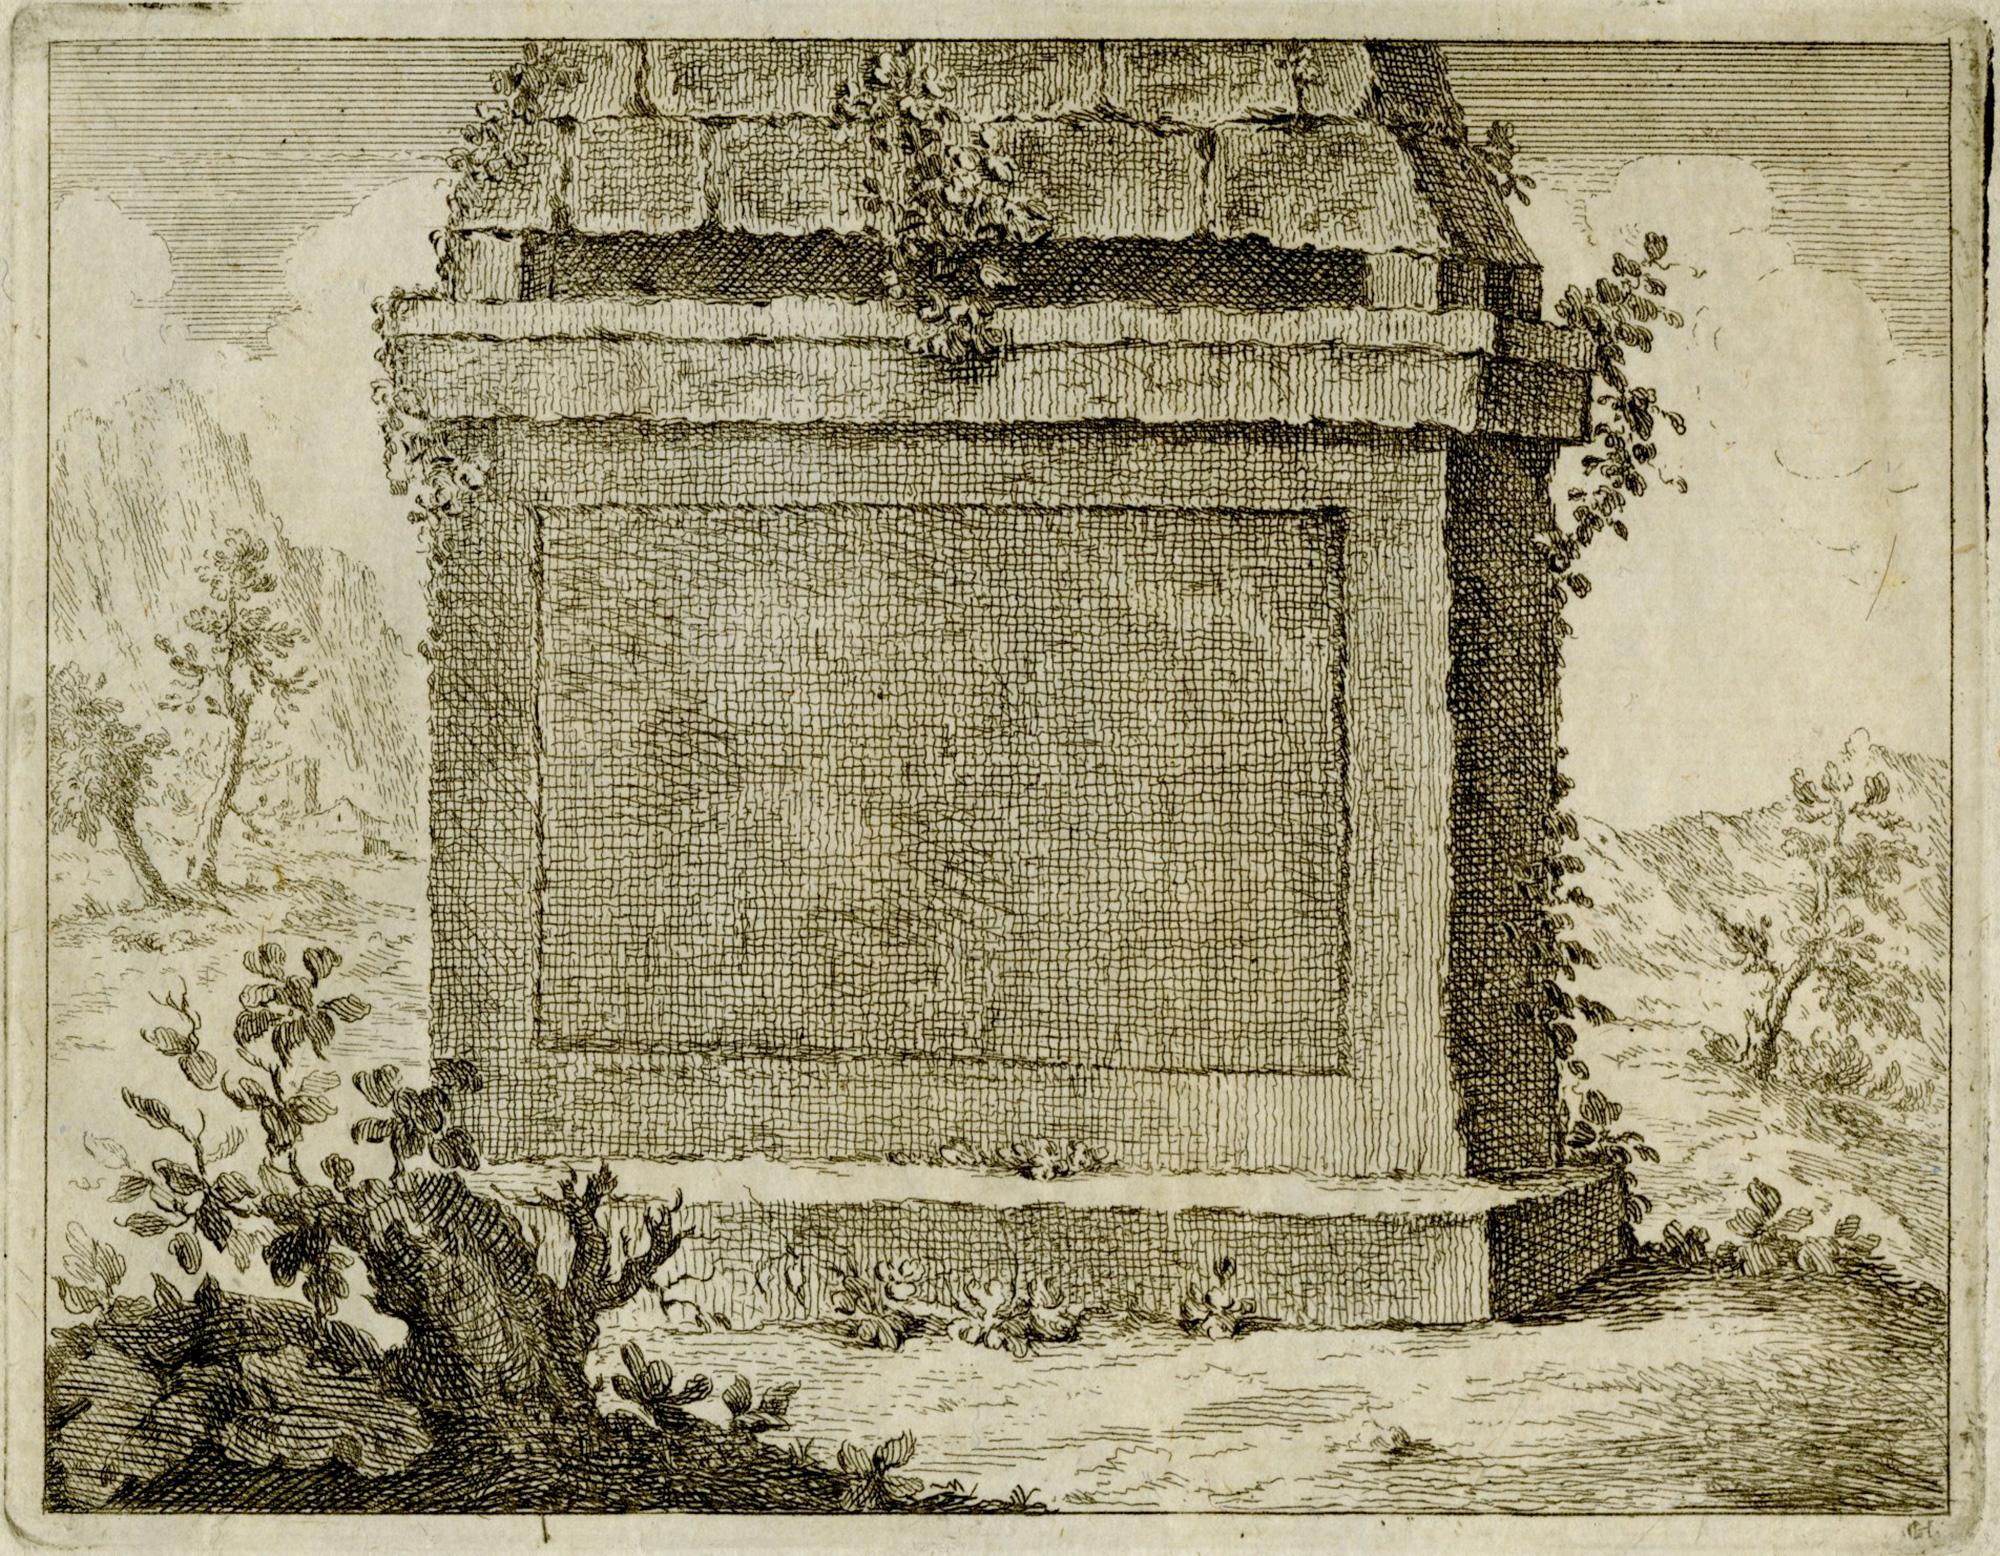 Frontispiece with tomb in a rocky landscape.